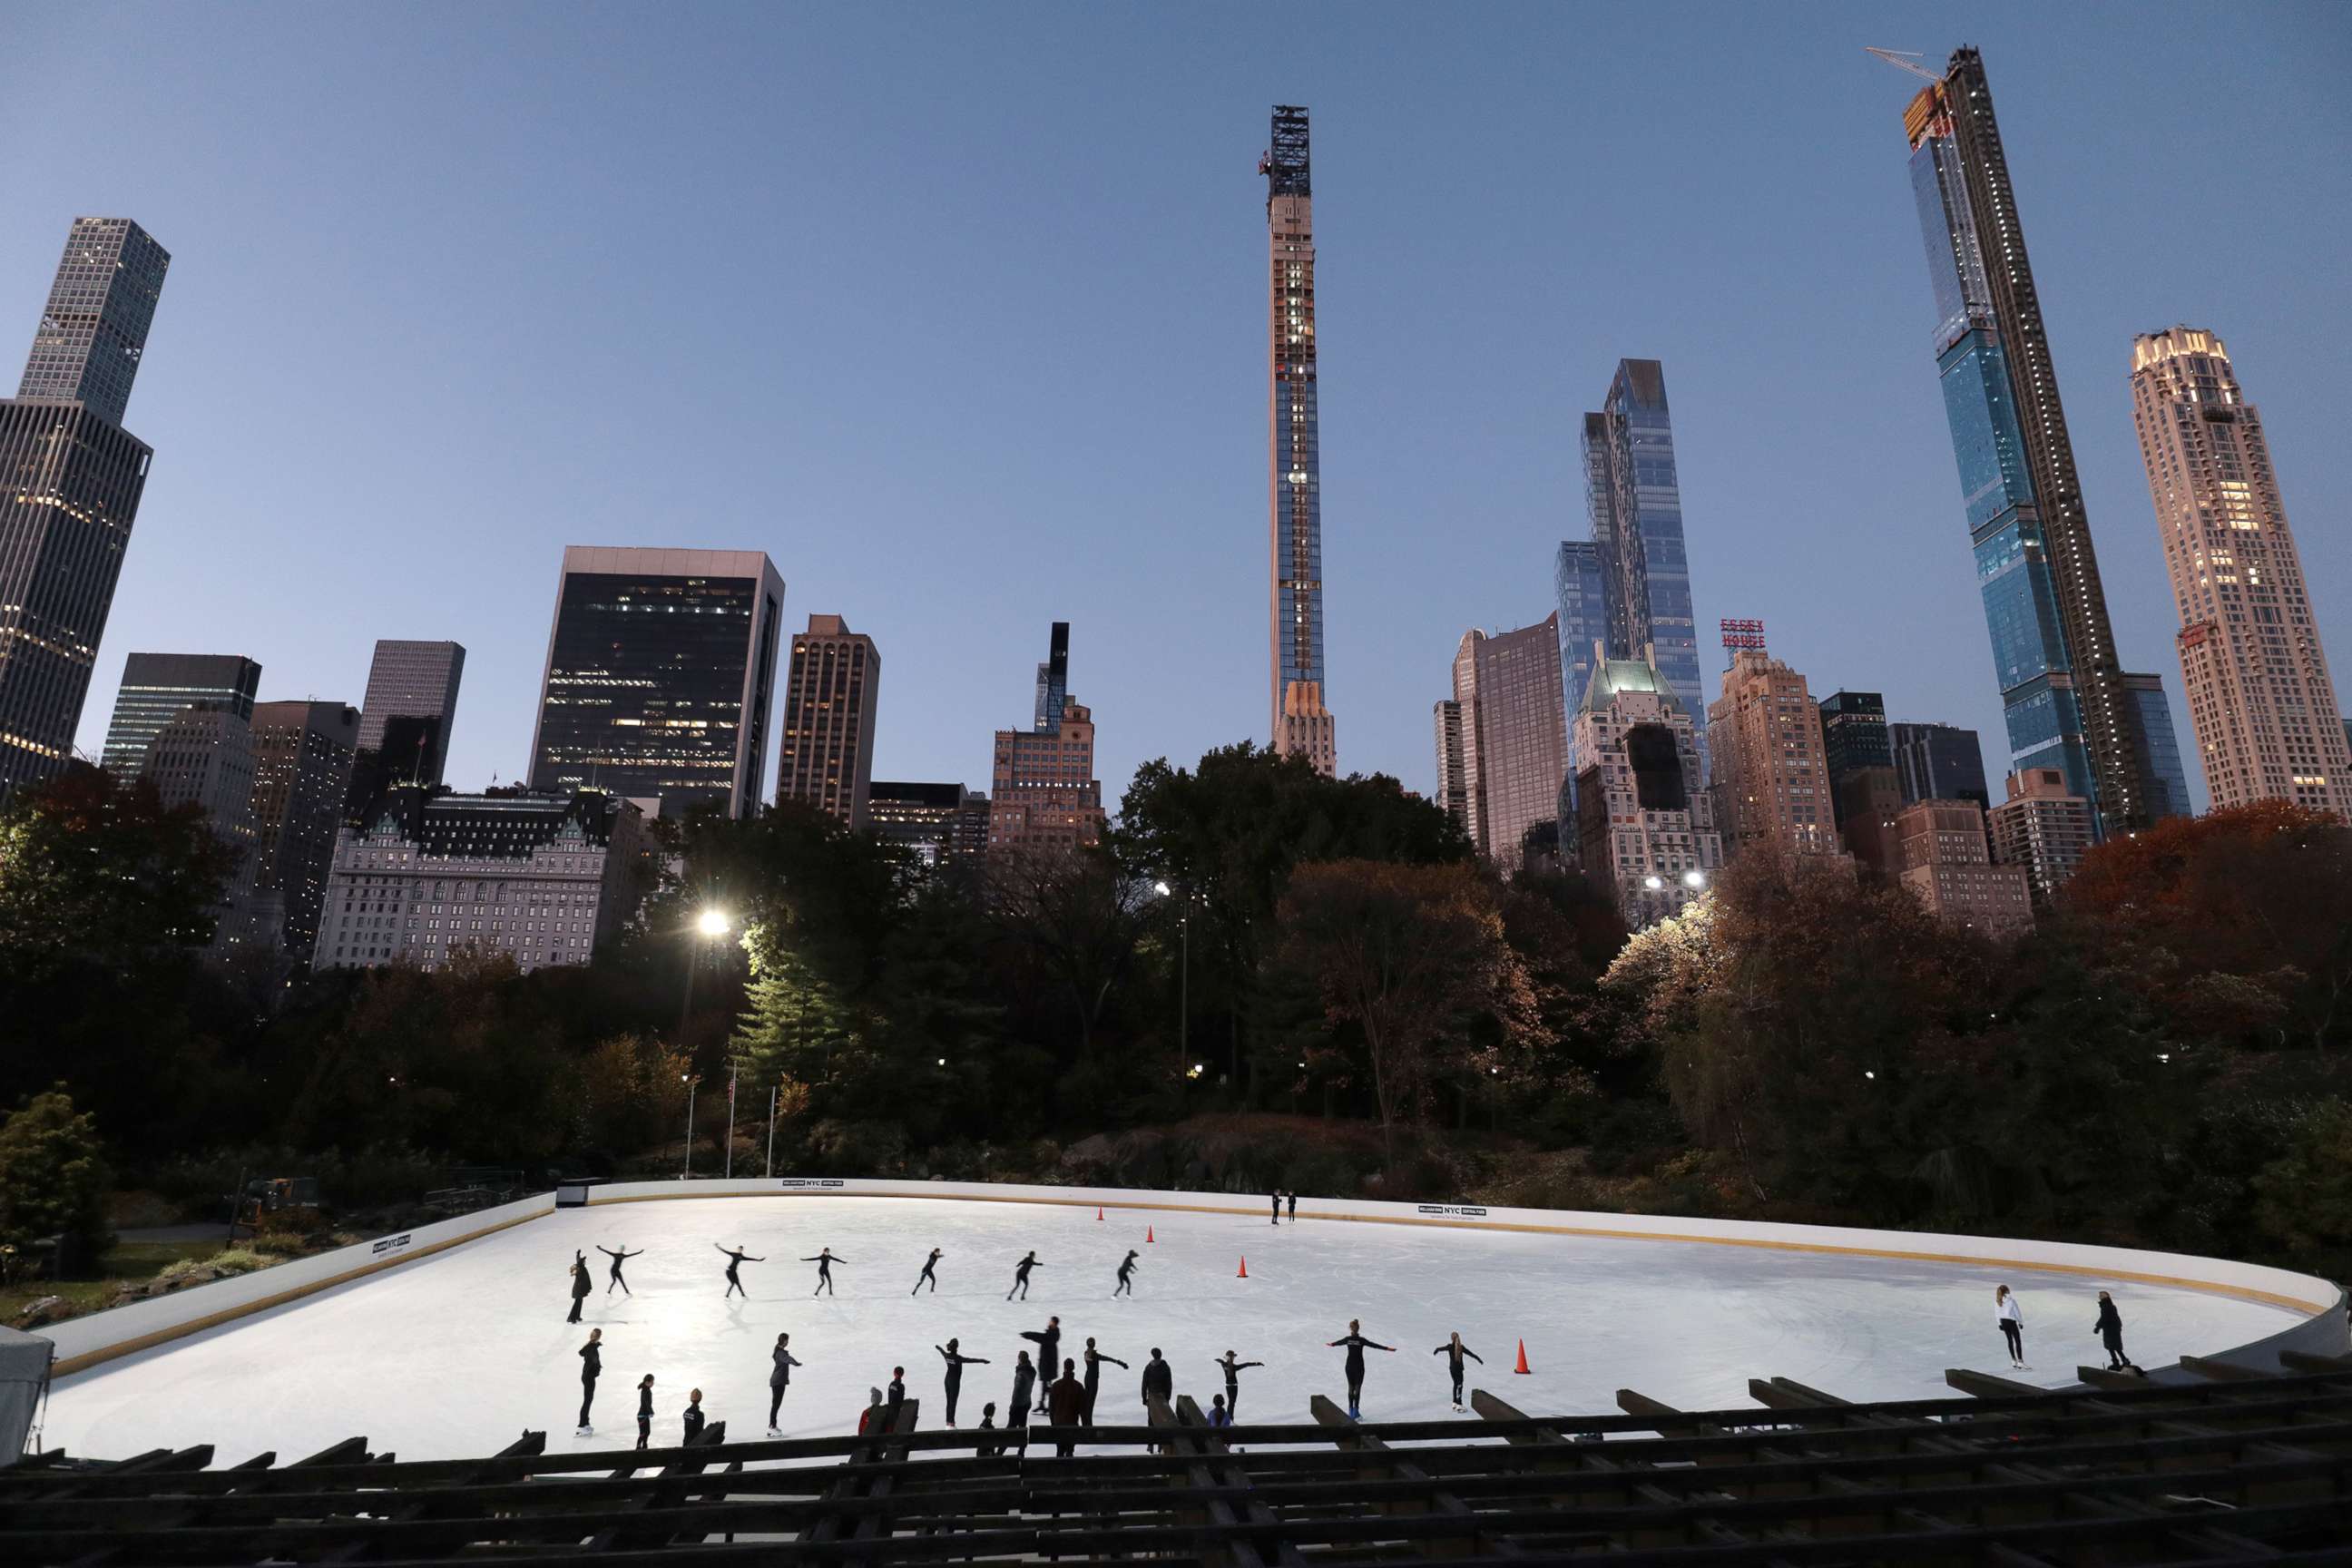 PHOTO: Wollman skating rink in Central Park, Nov. 2, 2019, in New York City.